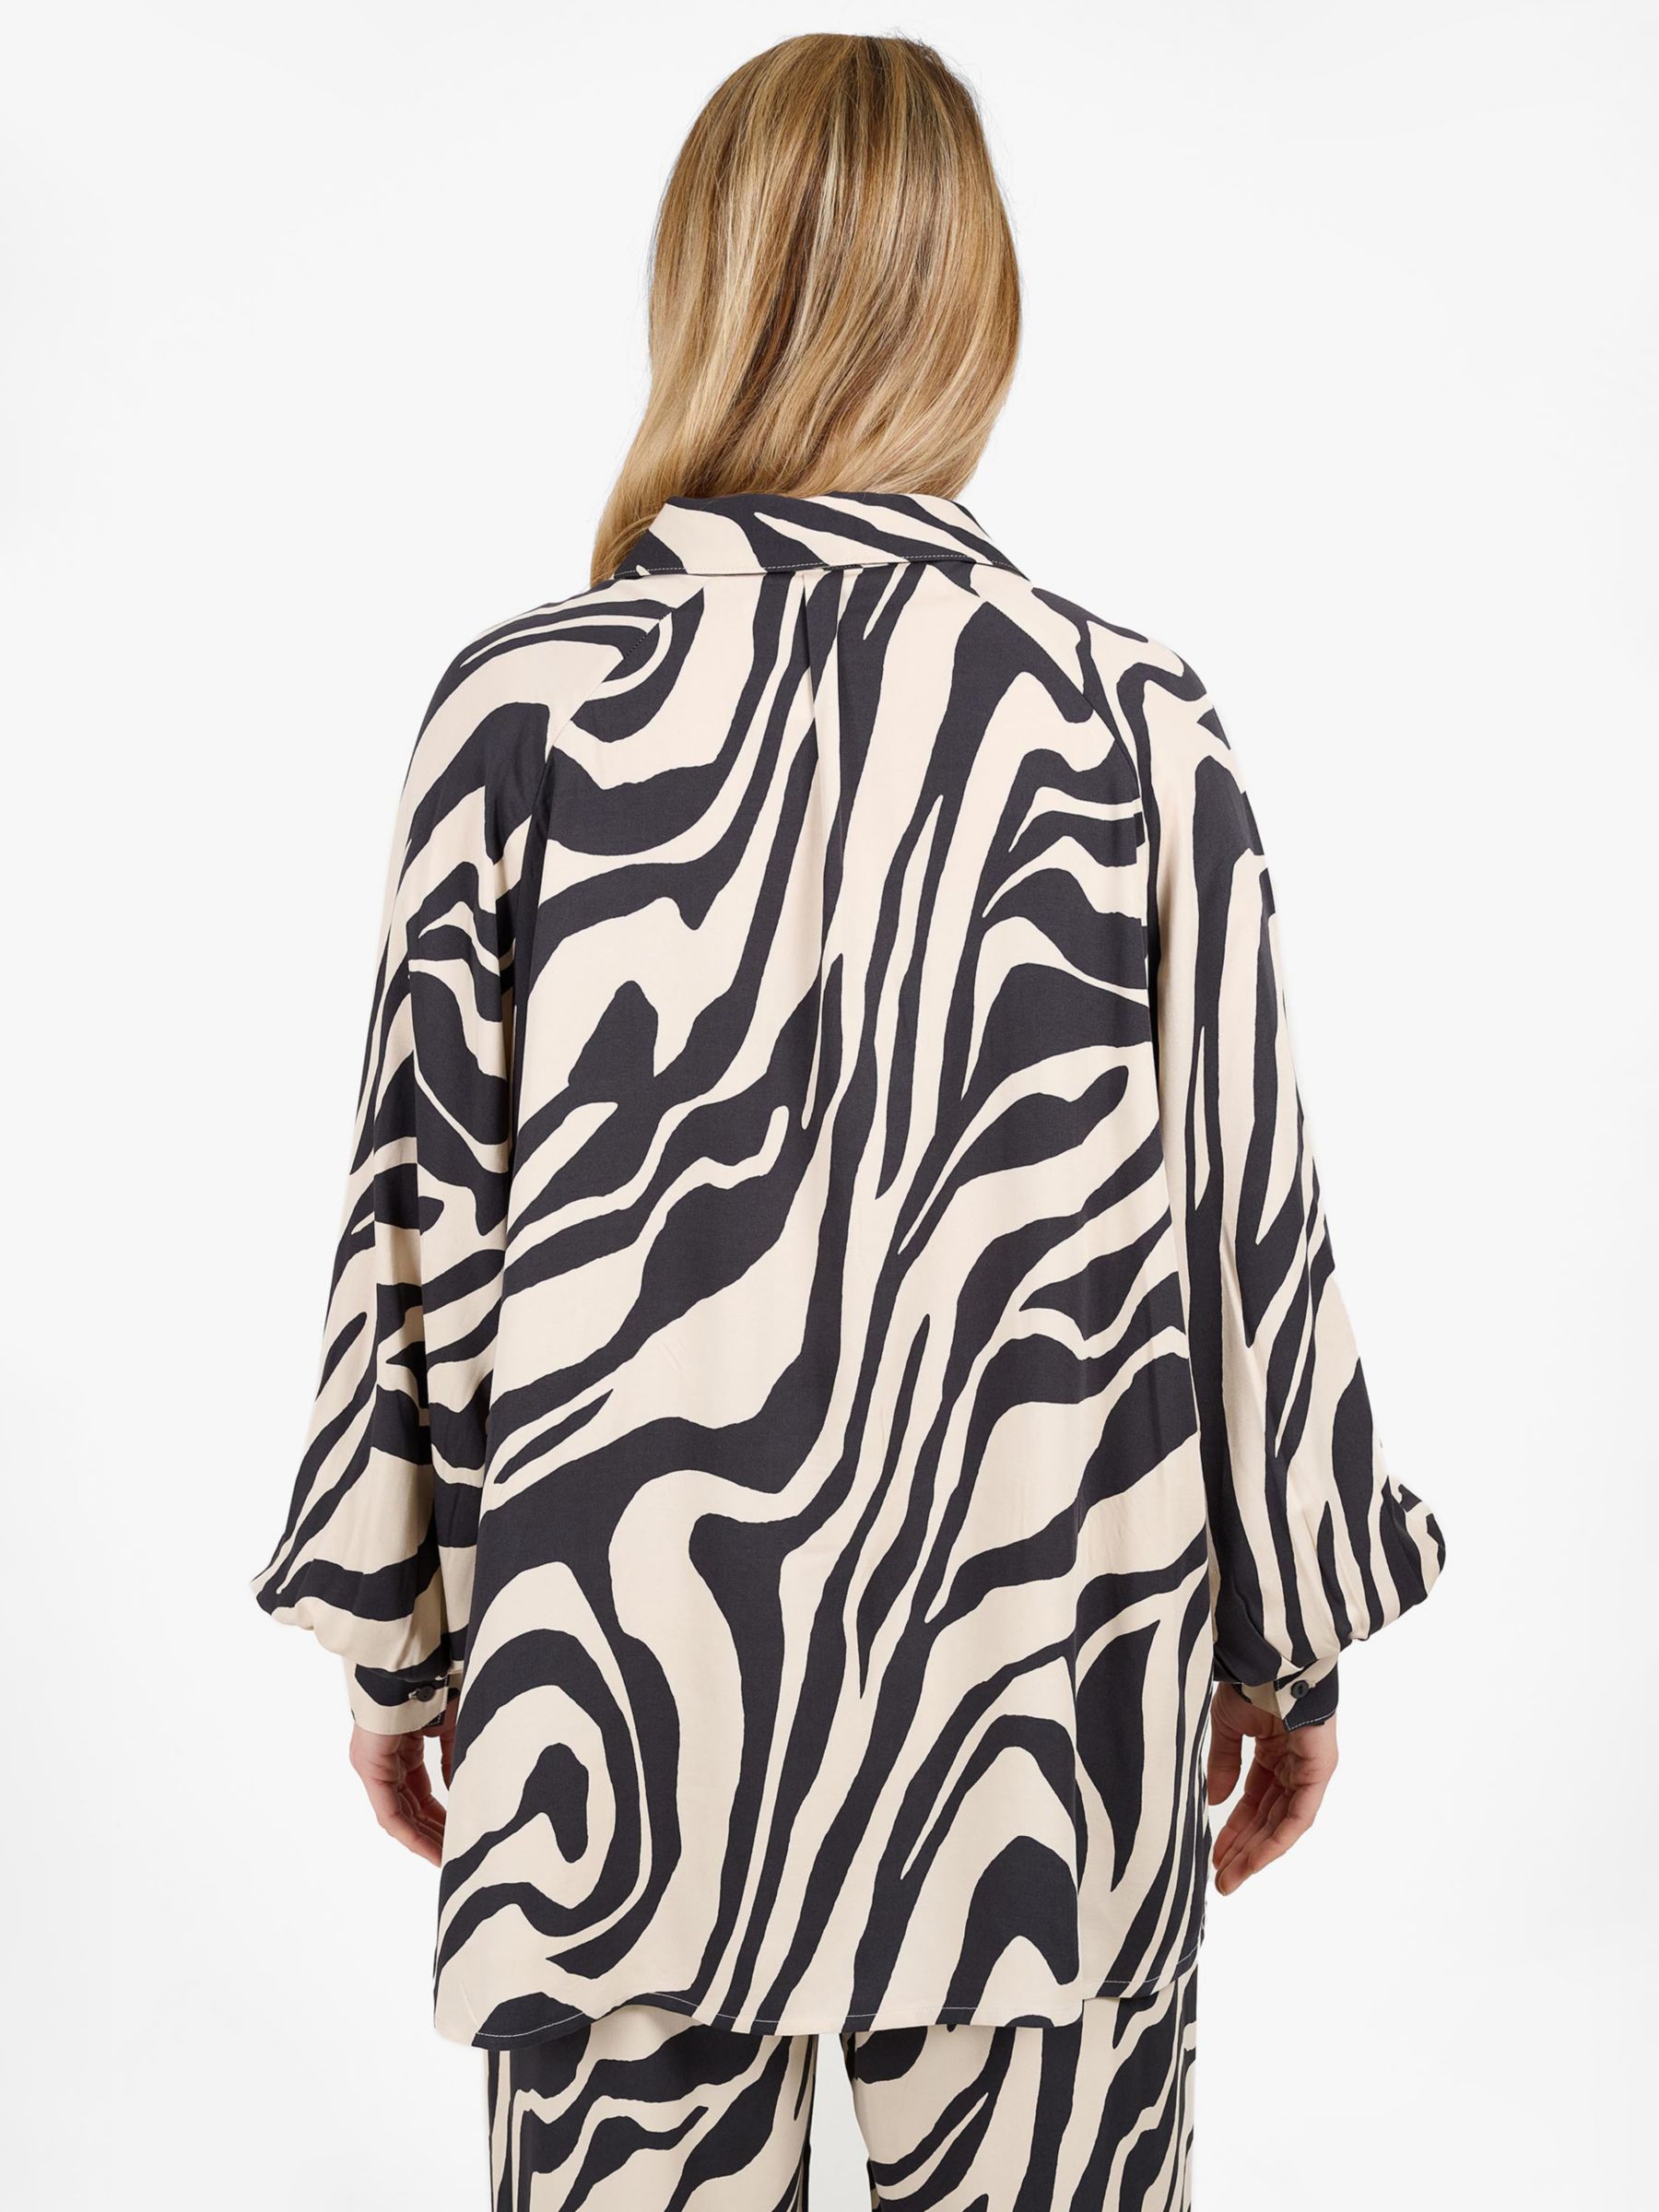 Buy Tutti & Co Adorn Abstract Print Oversized Shirt, Black/Stone Online at johnlewis.com